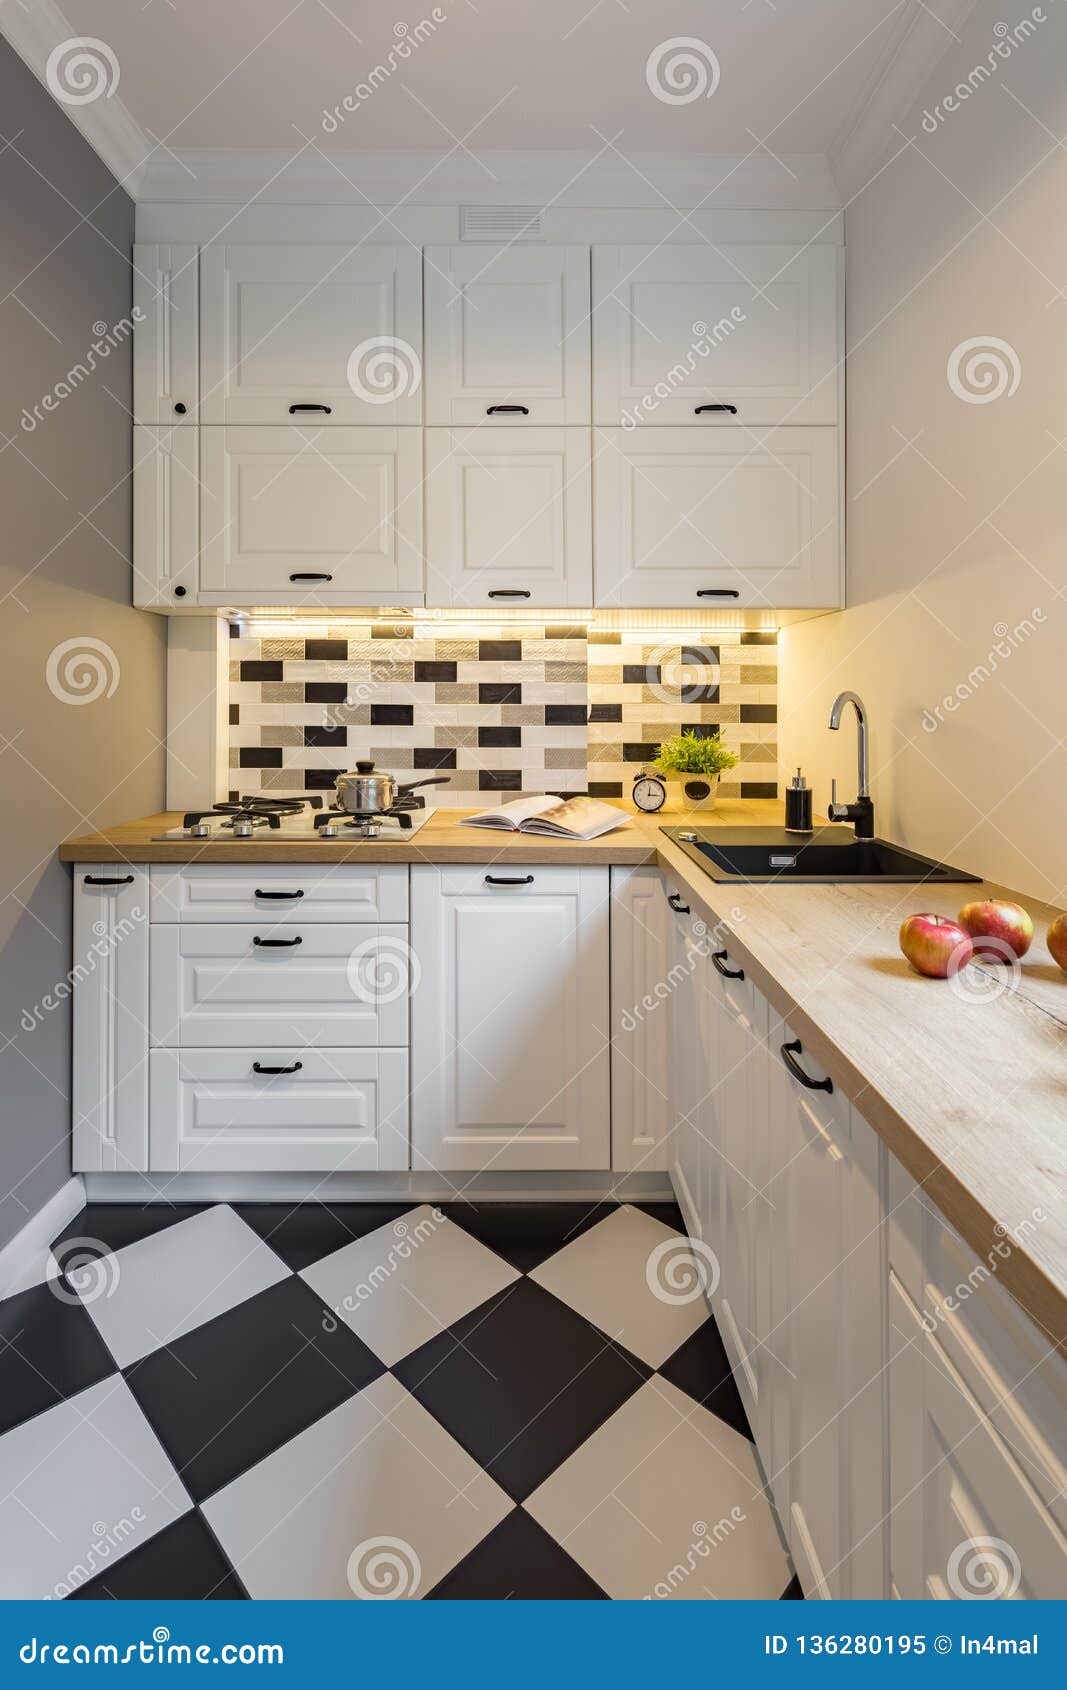 Kitchen With Modern Floor Tiles Stock Image Image Of Gray